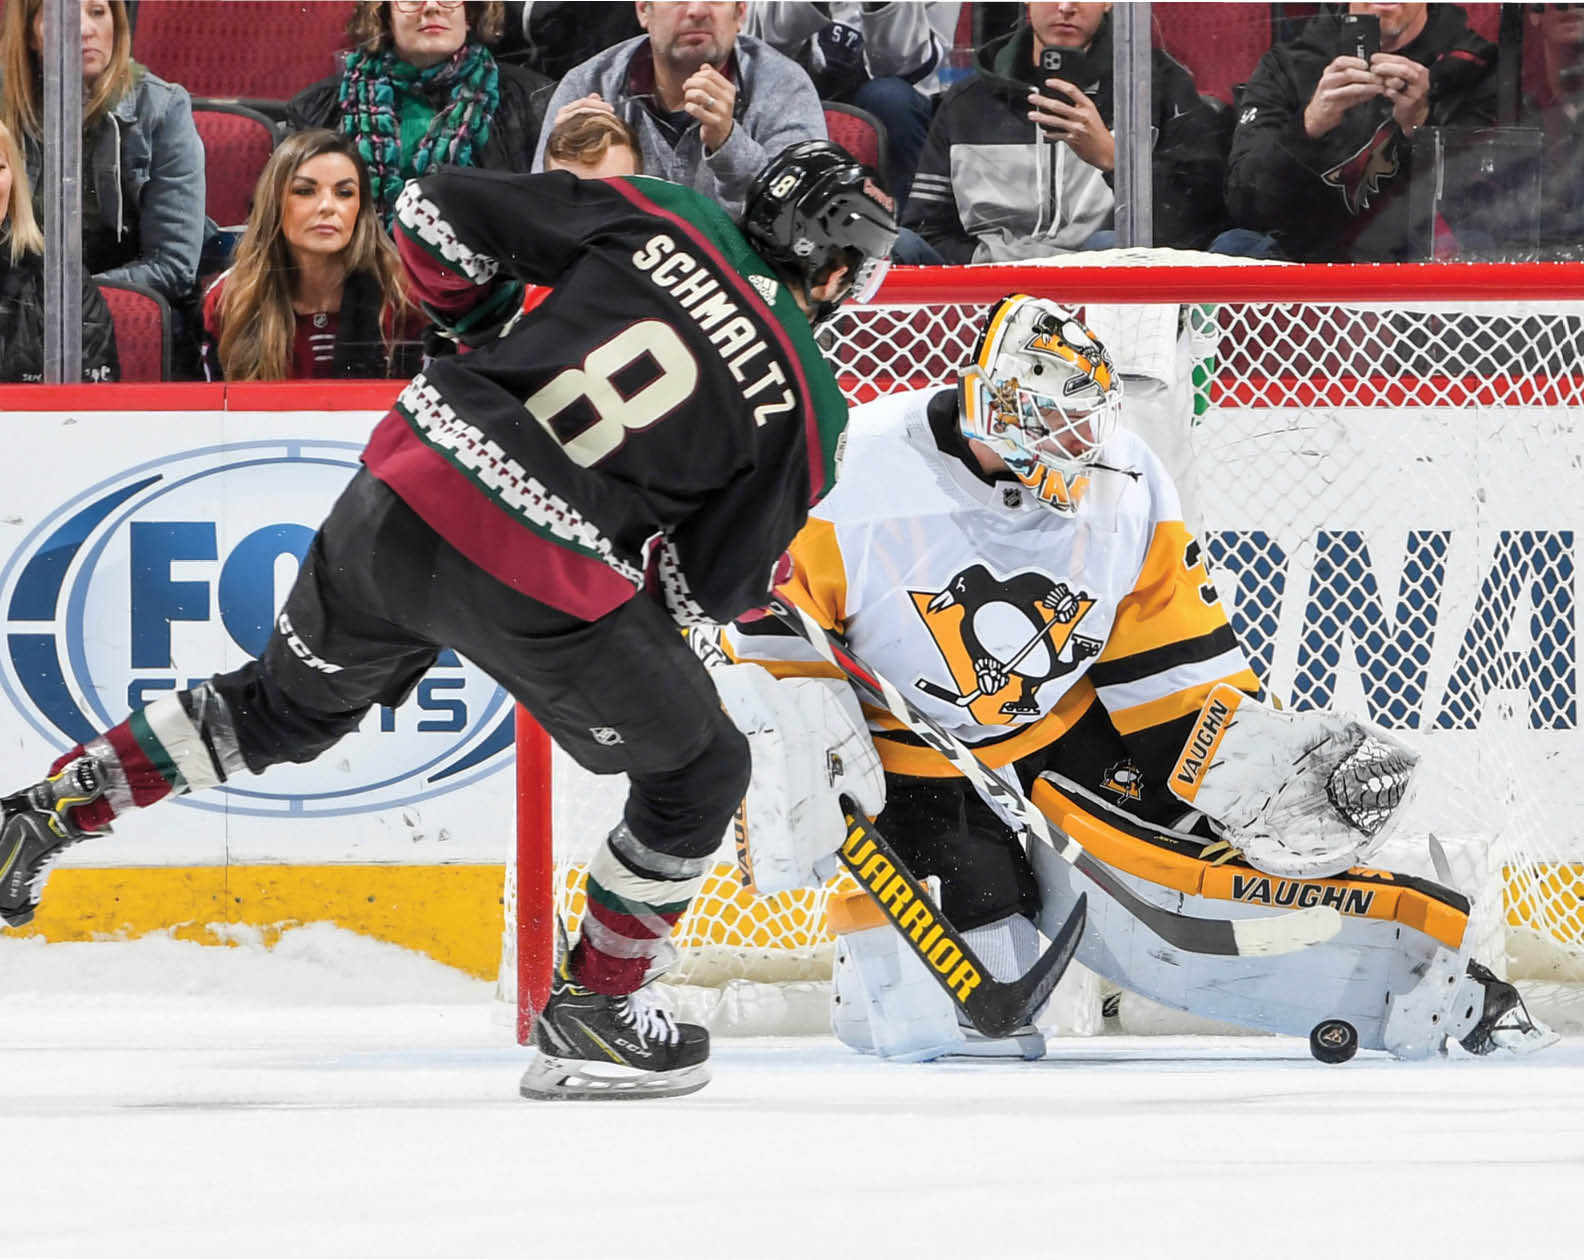 GLENDALE, ARIZONA - JANUARY 12: Goalie Tristian Jarry #35 of the Pittsburgh Penguins makes a save on the shot by Nick Schmaltz #8 of the Arizona Coyotes during a shootout of the NHL hockey game at Gila River Arena on January 12, 2020 in Glendale, Arizona  (Photo by Norm Hall NHLI via Getty Images)